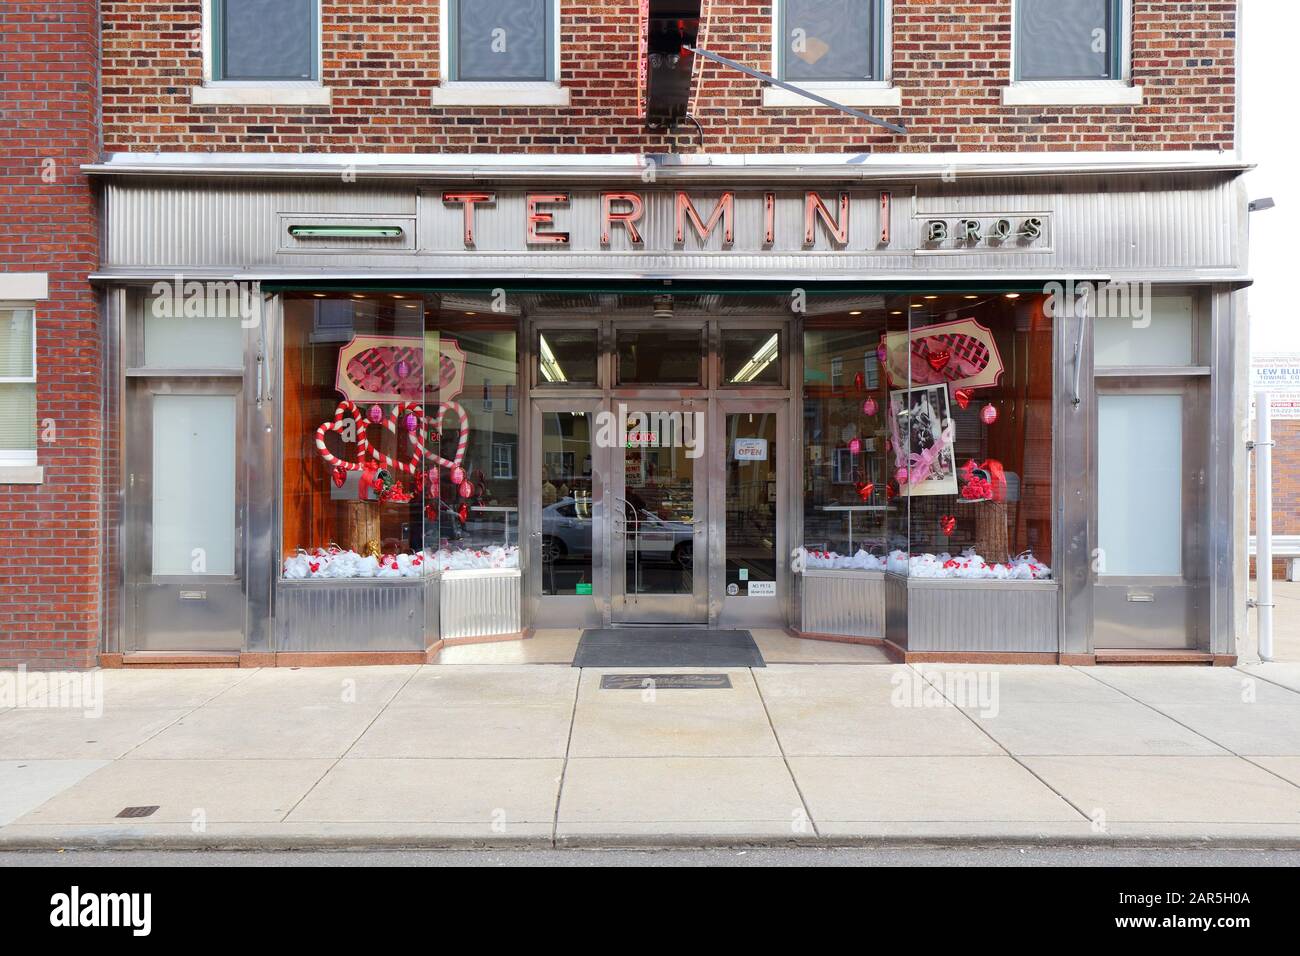 Termini Bros Bakery, 1523 S 8th Street, Philadelphia, PA. exterior storefront of an iconic Italian American pastry shop in Passyunk Square Stock Photo